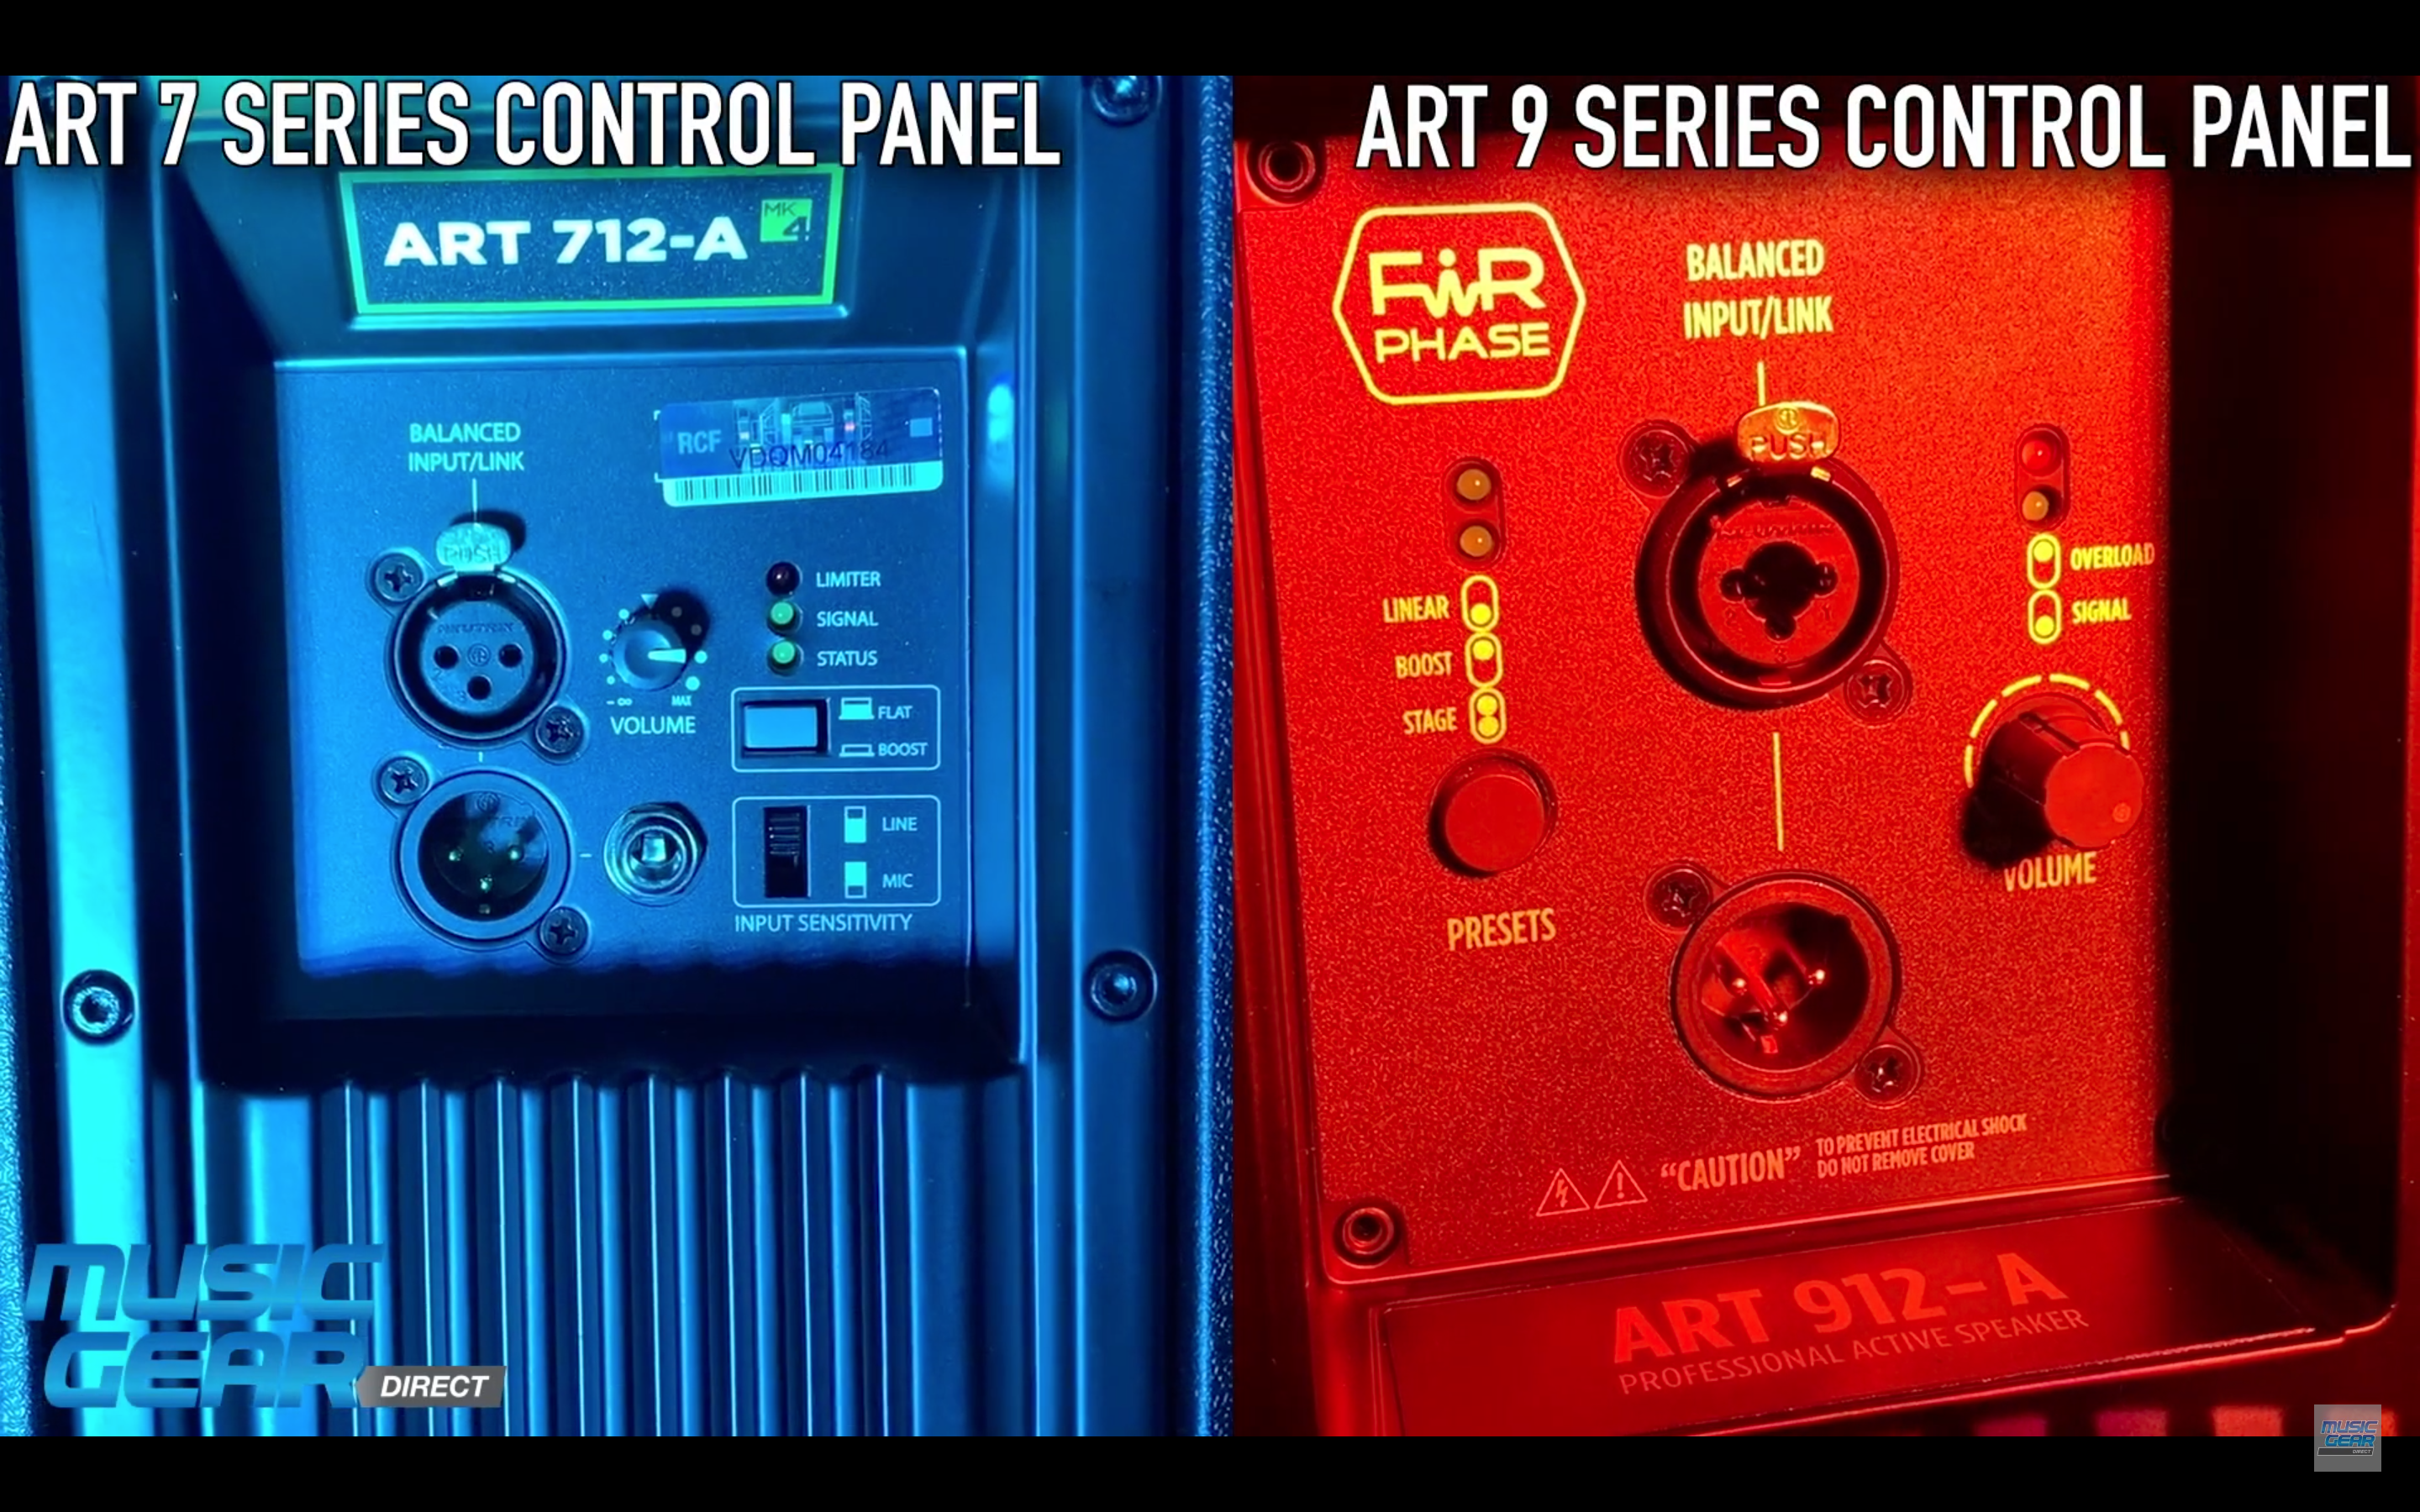 The control panel of an RCF ART 9 series speaker and RCF ART 7 series speaker